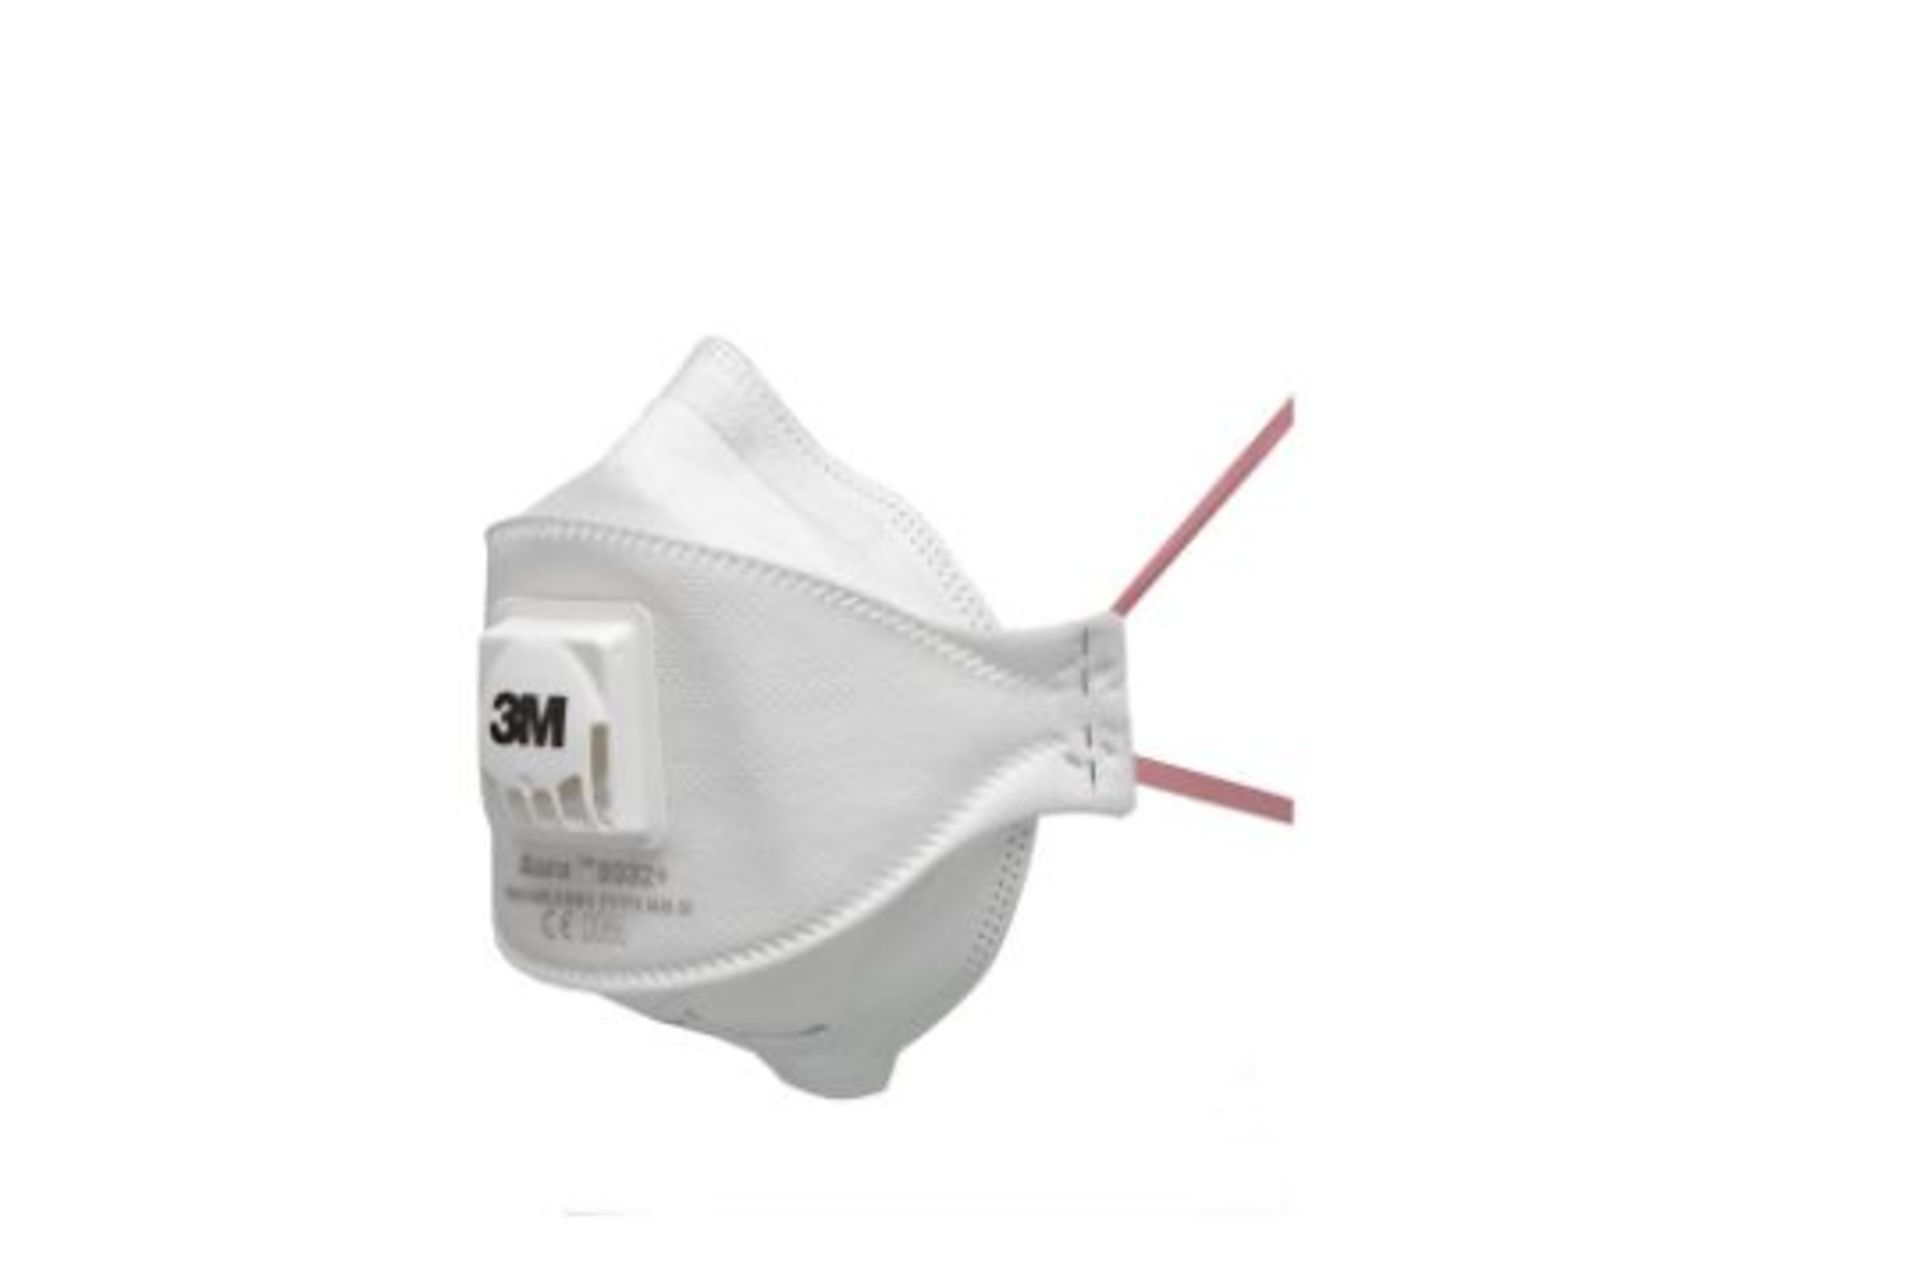 TRADE LOT 120 X BRAND NEW PACKS OF 10 3M AURA 9332 DISPOSABLE MASK, VALVED, WHITE FFP3, FILTERS